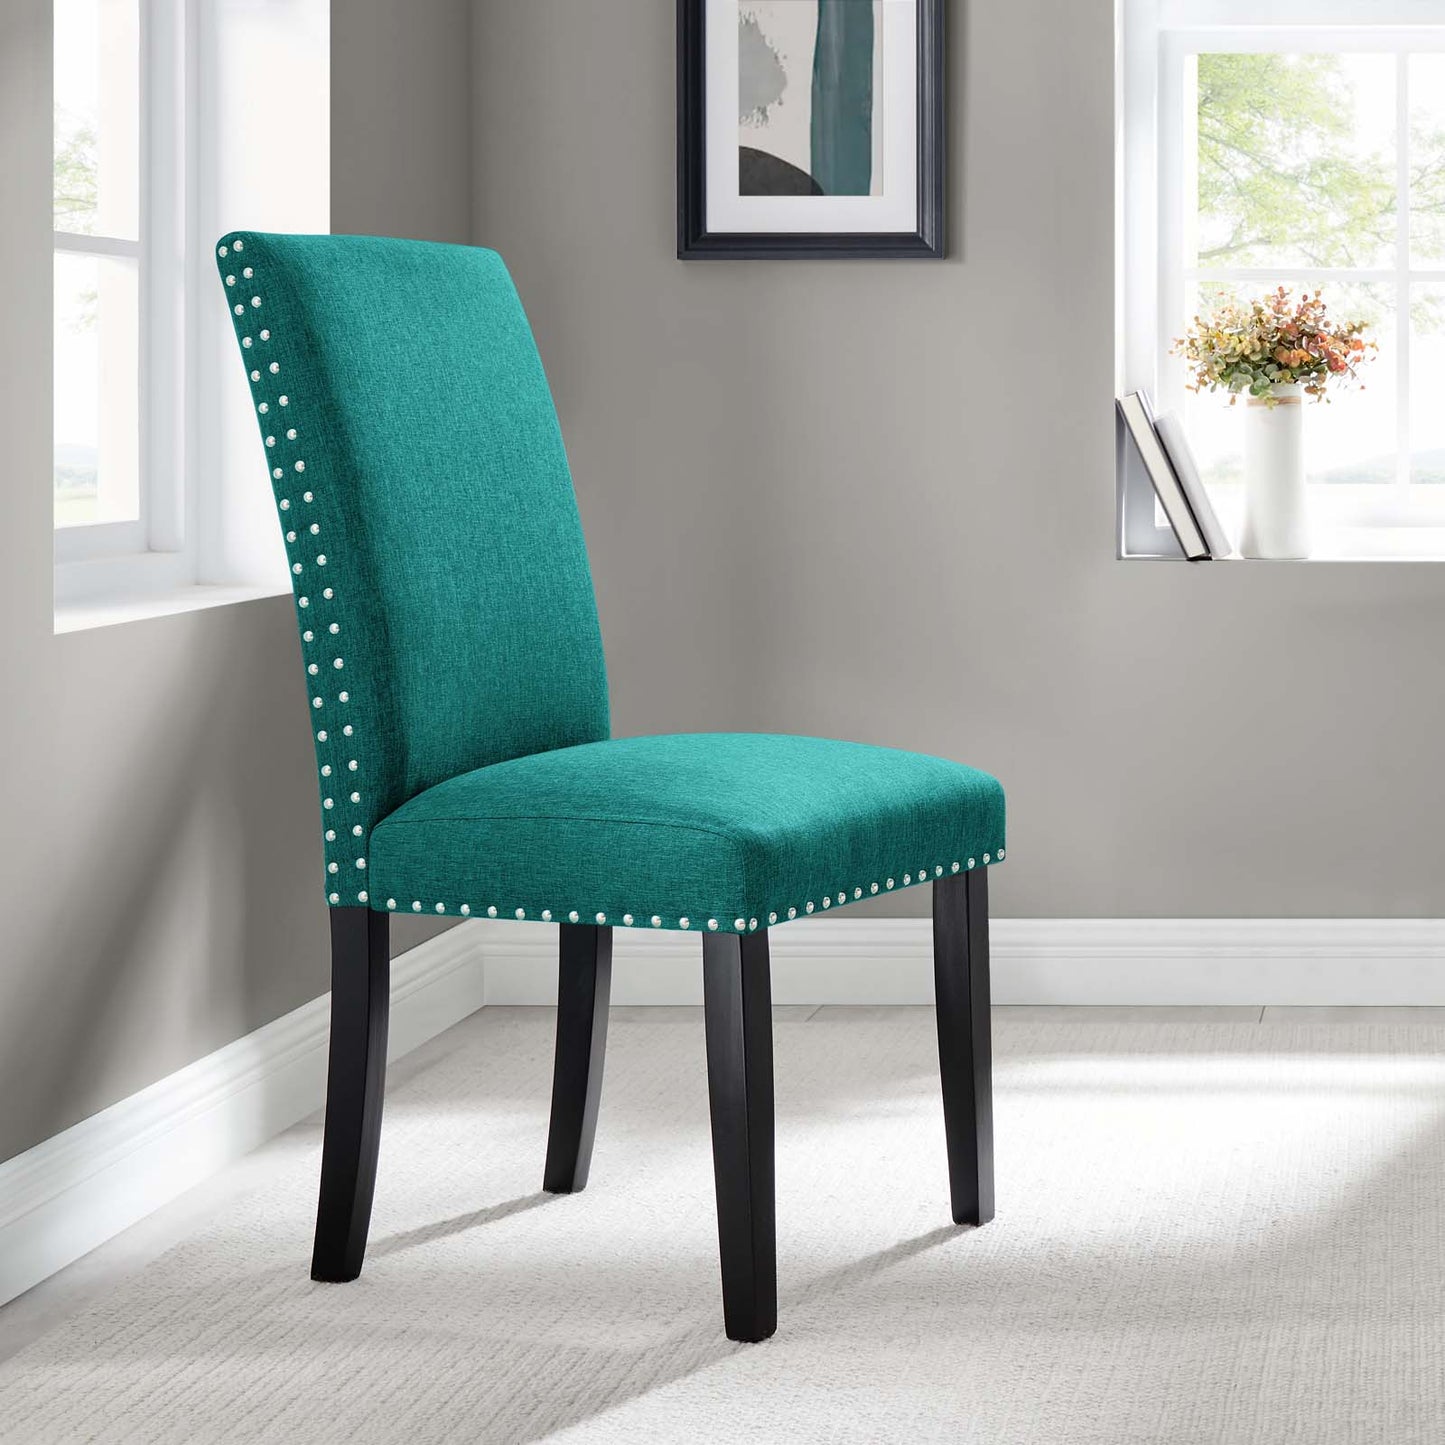 Parcel Dining Upholstered Fabric Side Chair Teal EEI-1384-TEA